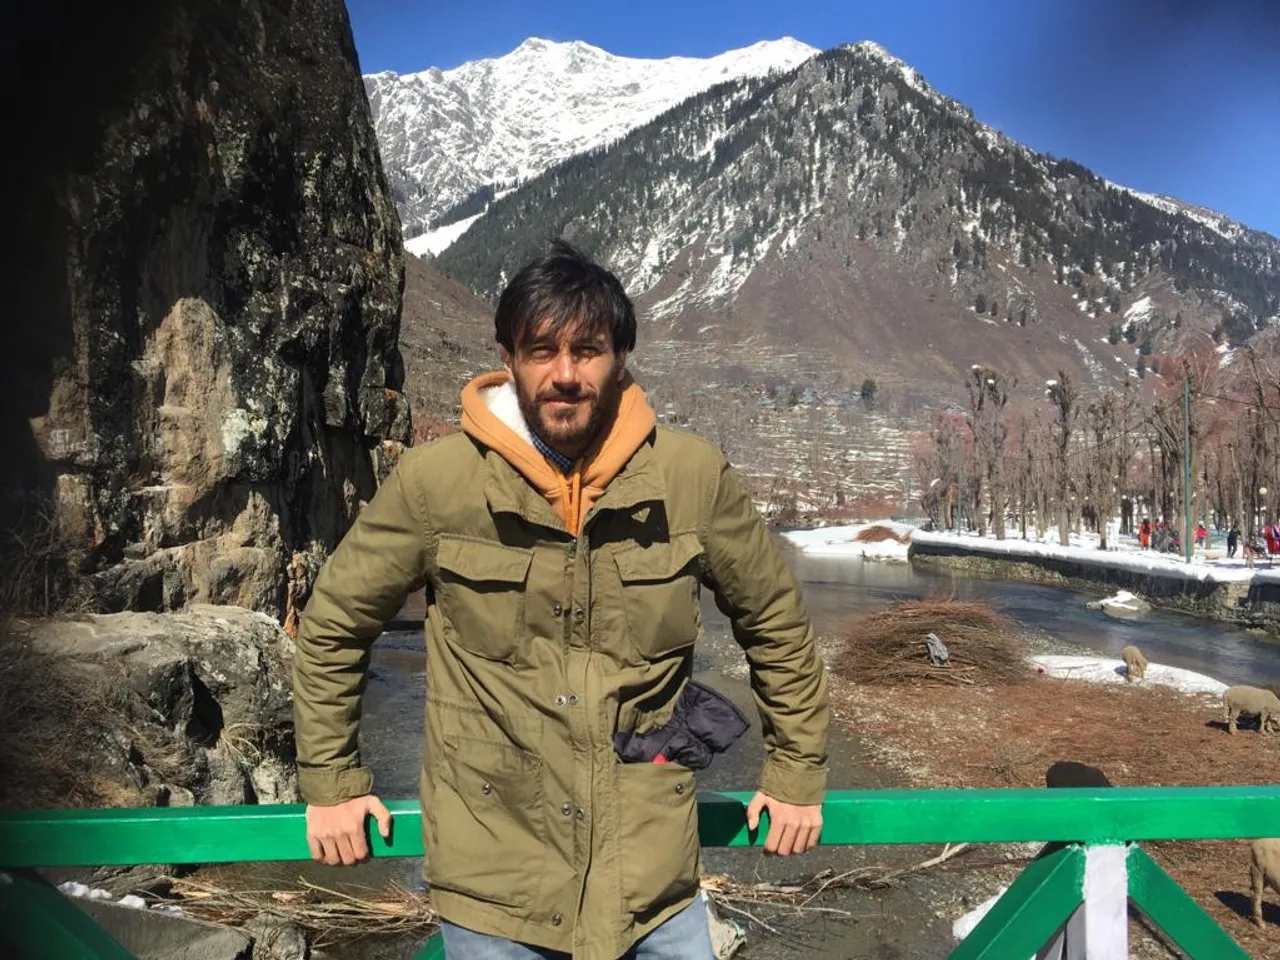 “Kashmir is the most beautiful place on earth” says Danny Sura